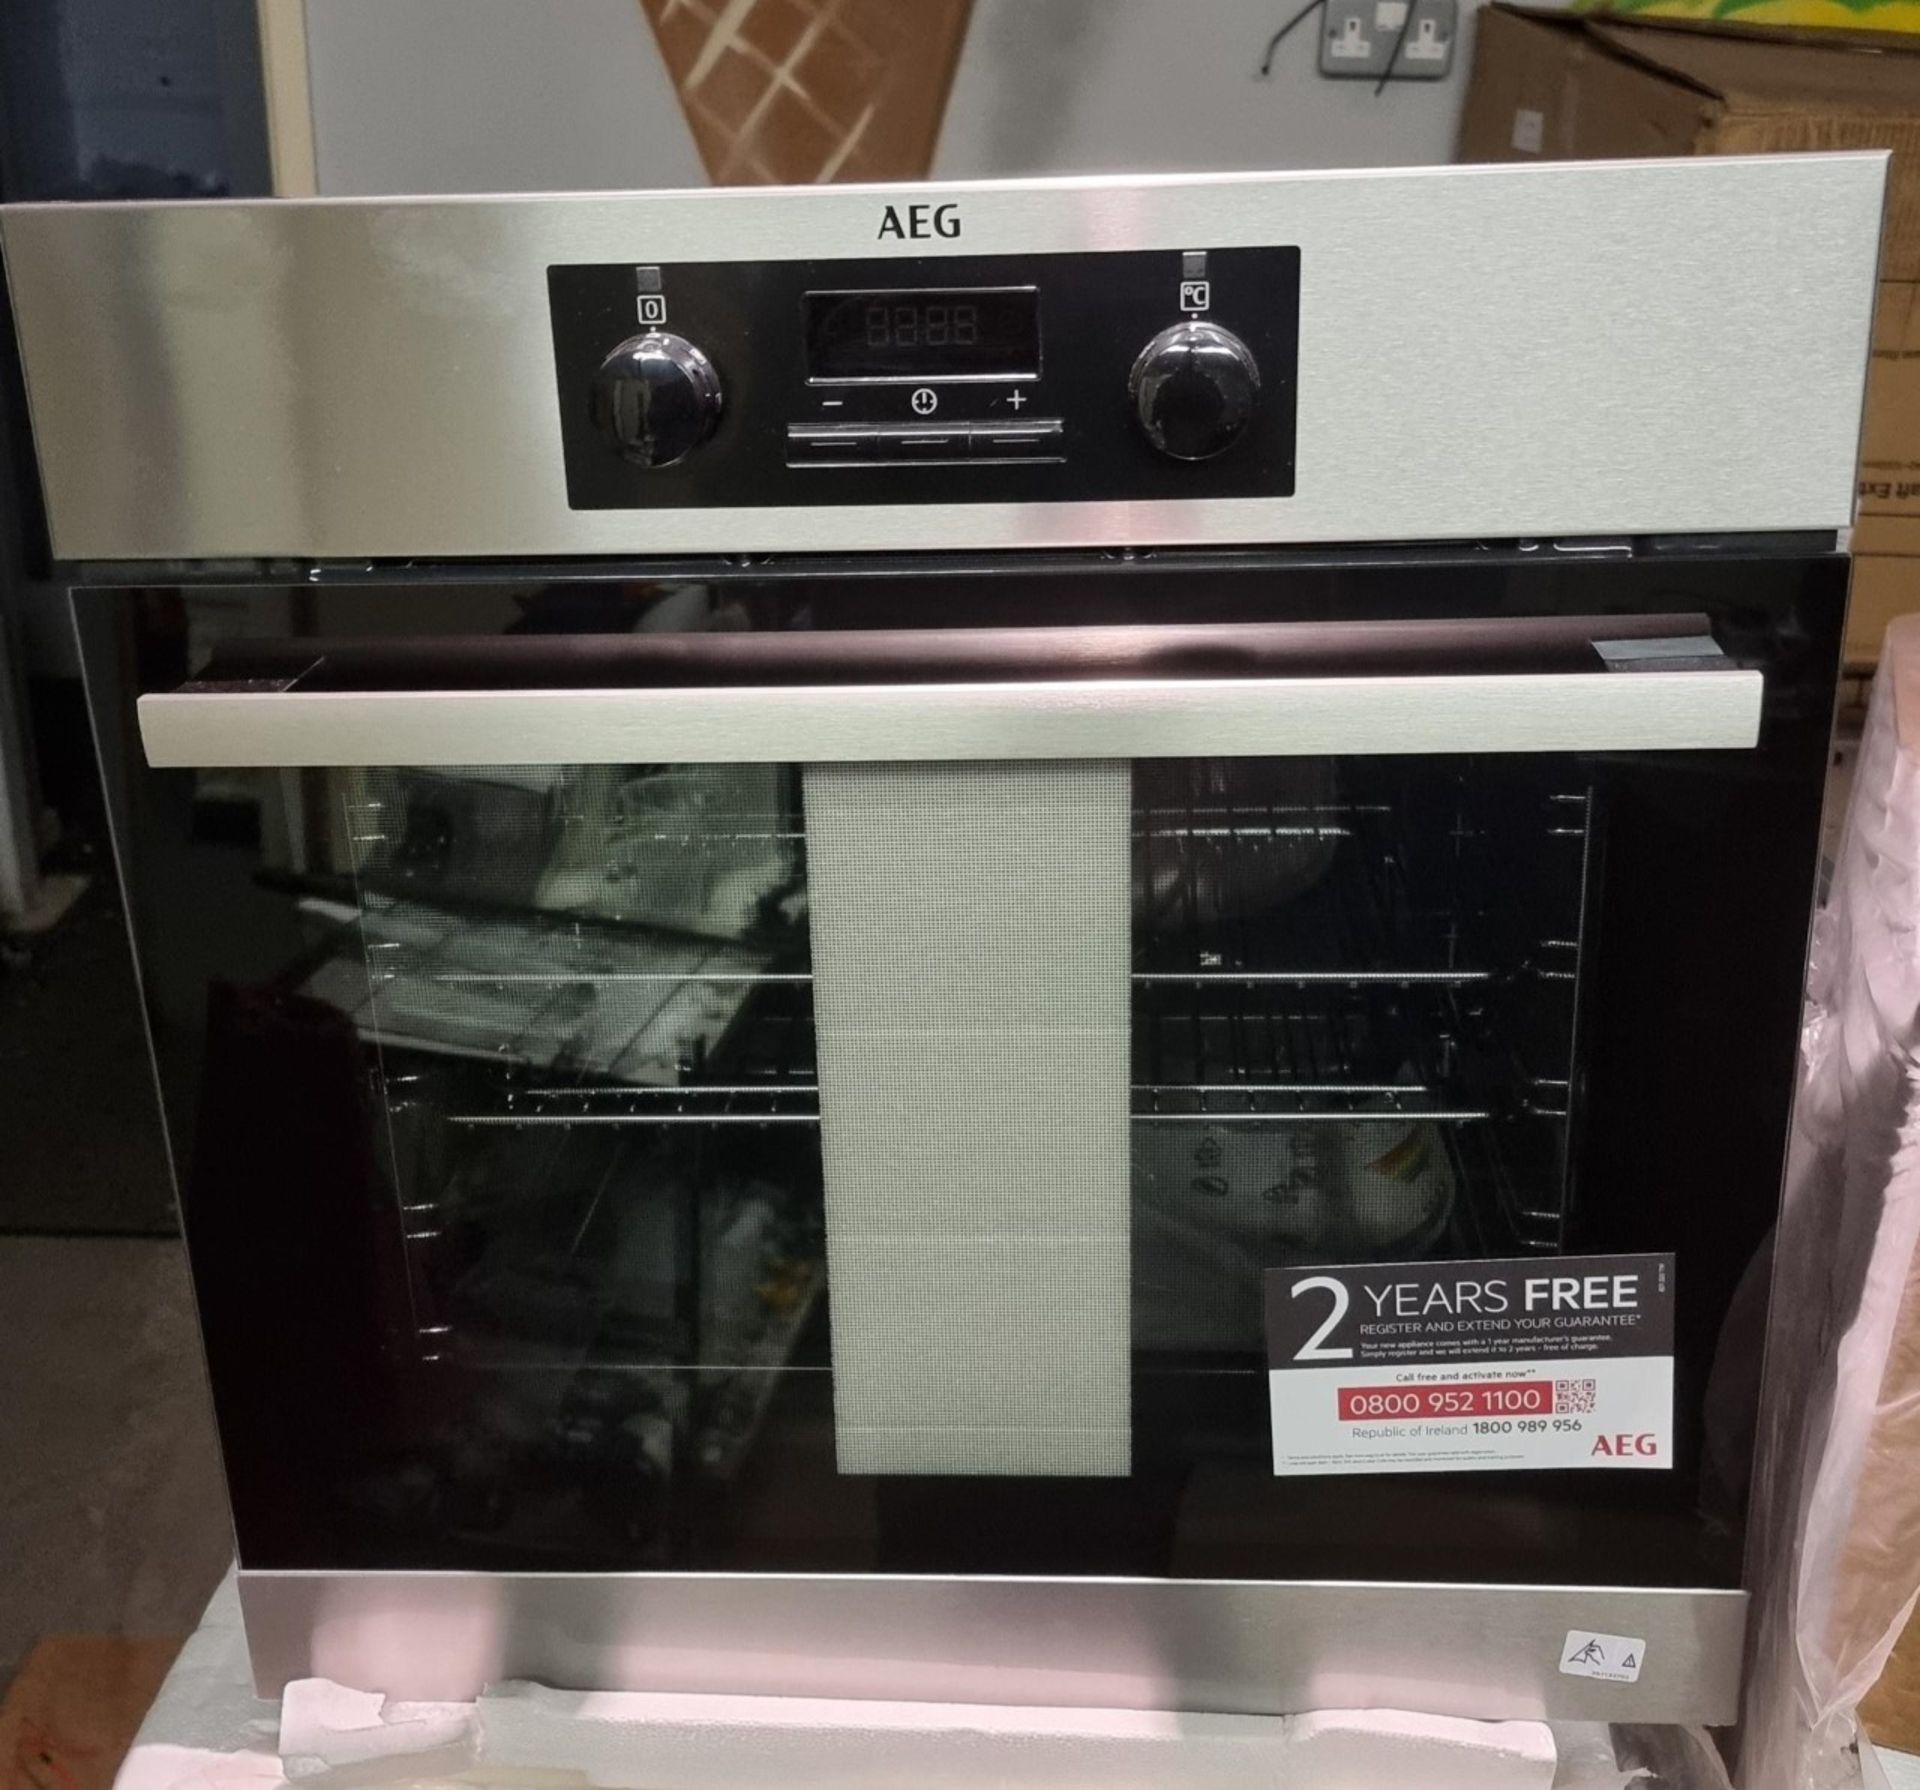 NEW/GRADED AND UNPACKAGED AEG, BEB231011M, Built In Single Oven (Slight damage to rear case)